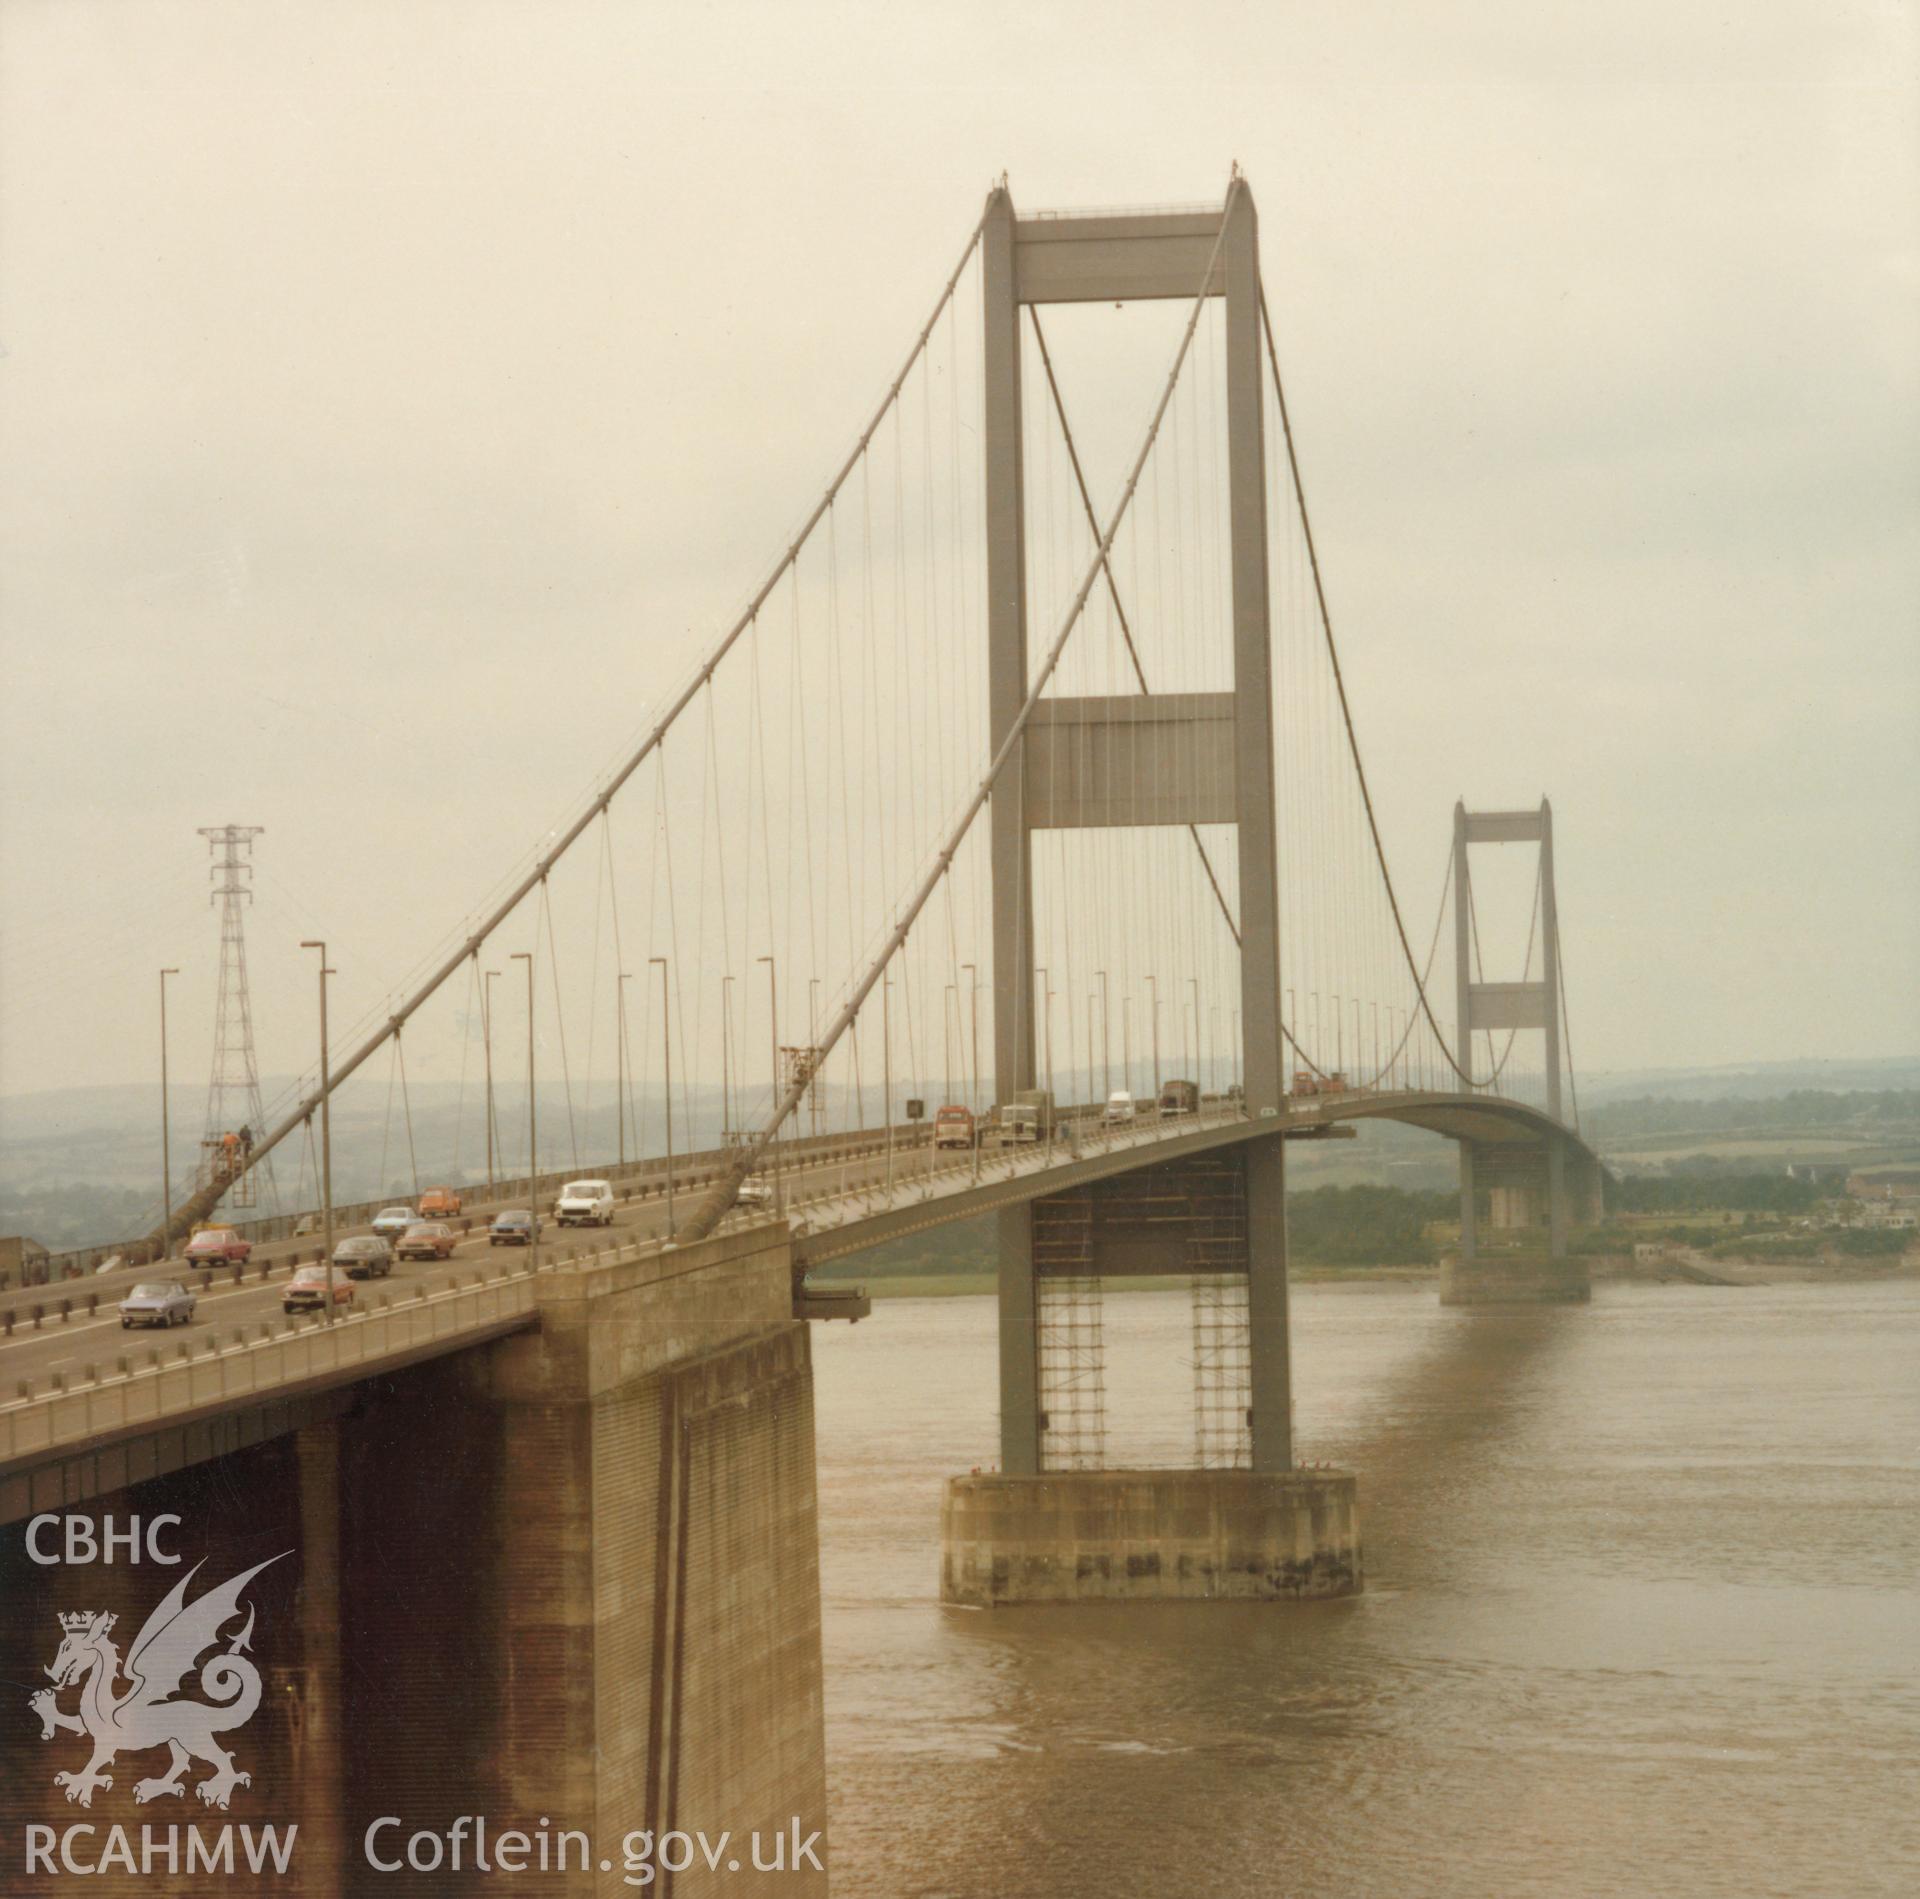 View of the Severn Bridge. From the Central Office of Information Collection.